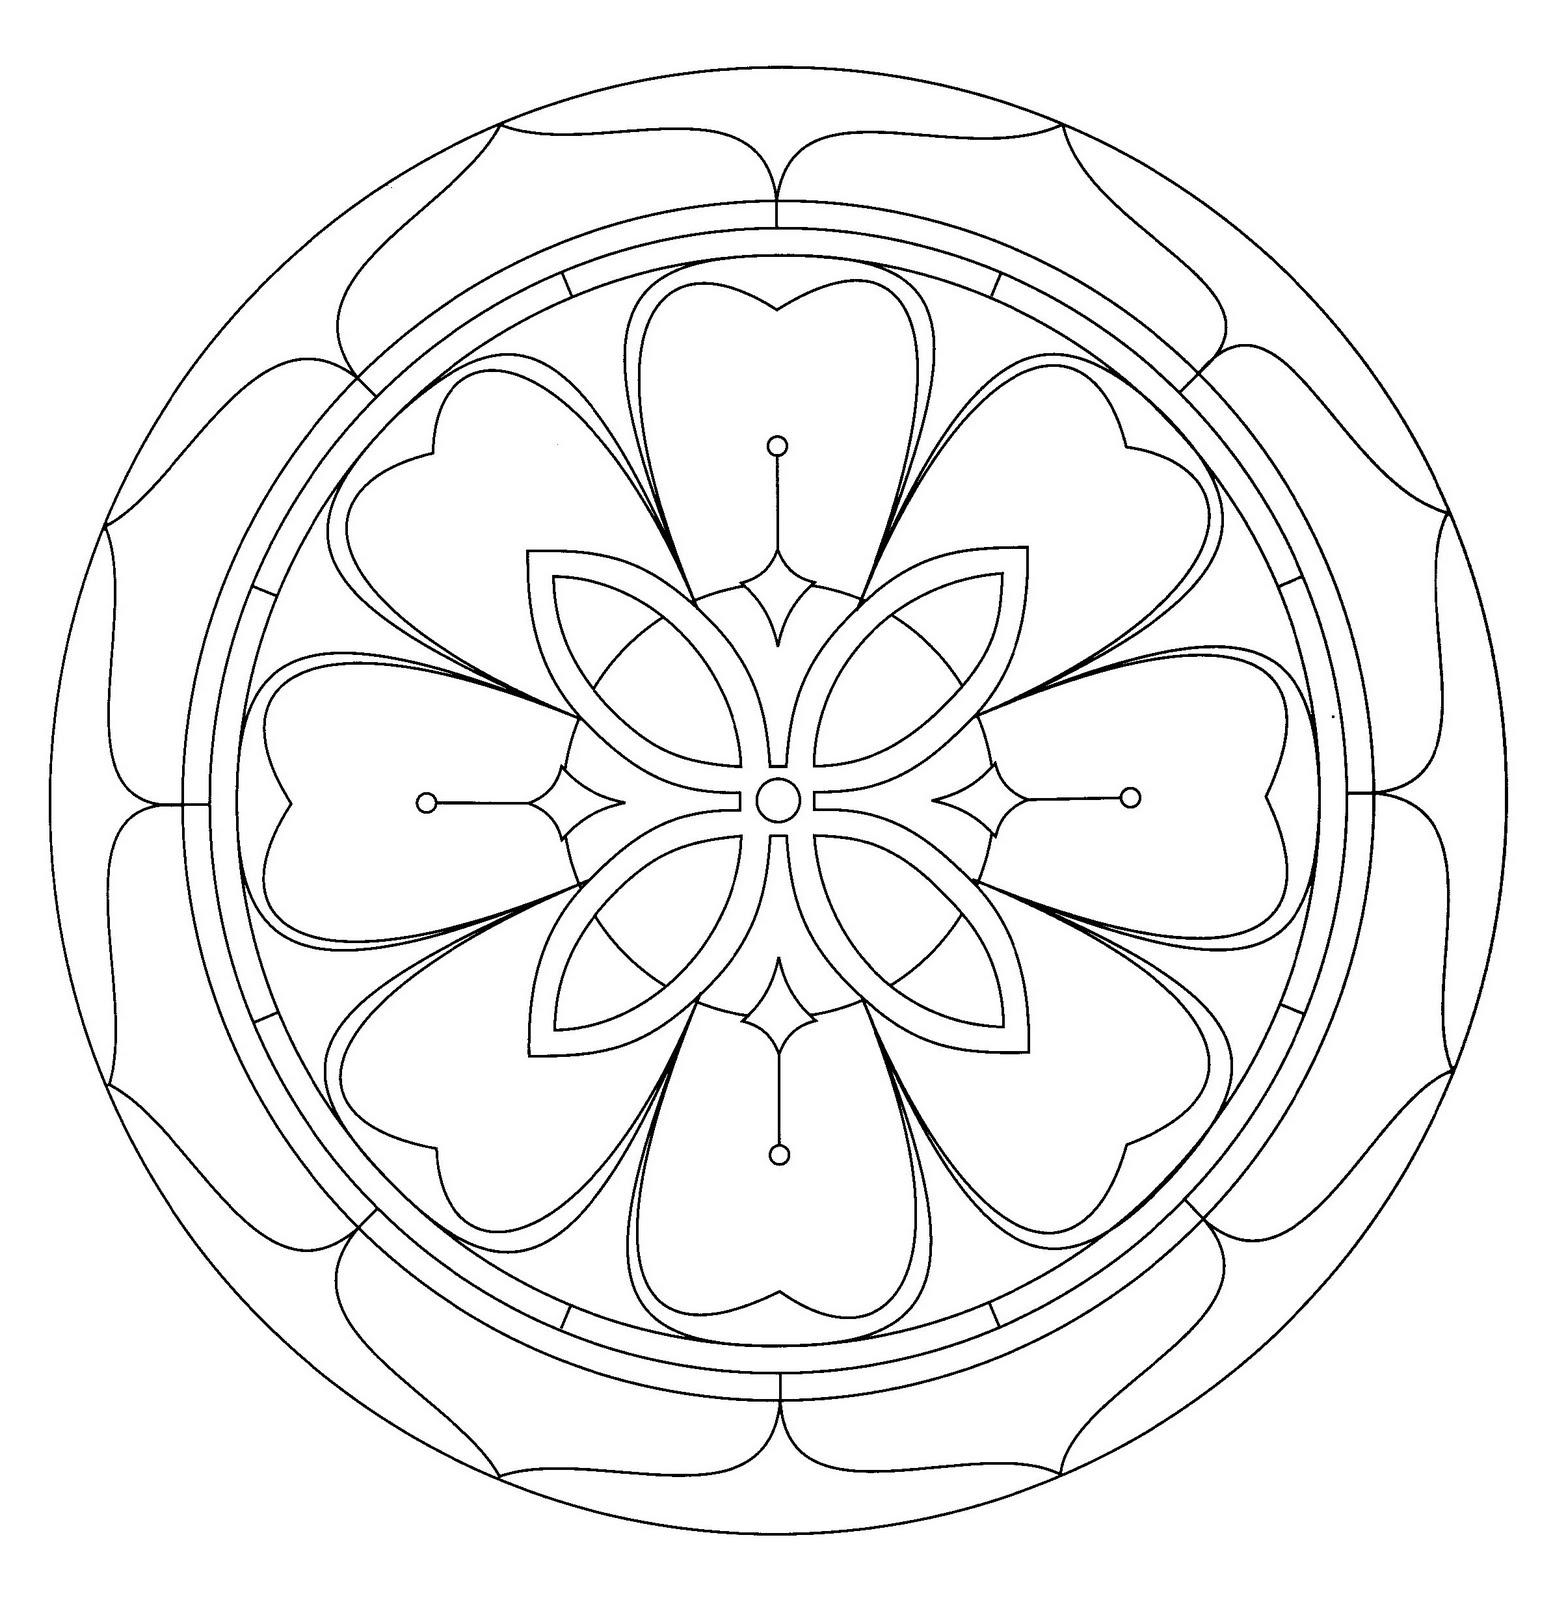 Mandala Coloring Pages  Free Printable Pictures Coloring Pages For Kids